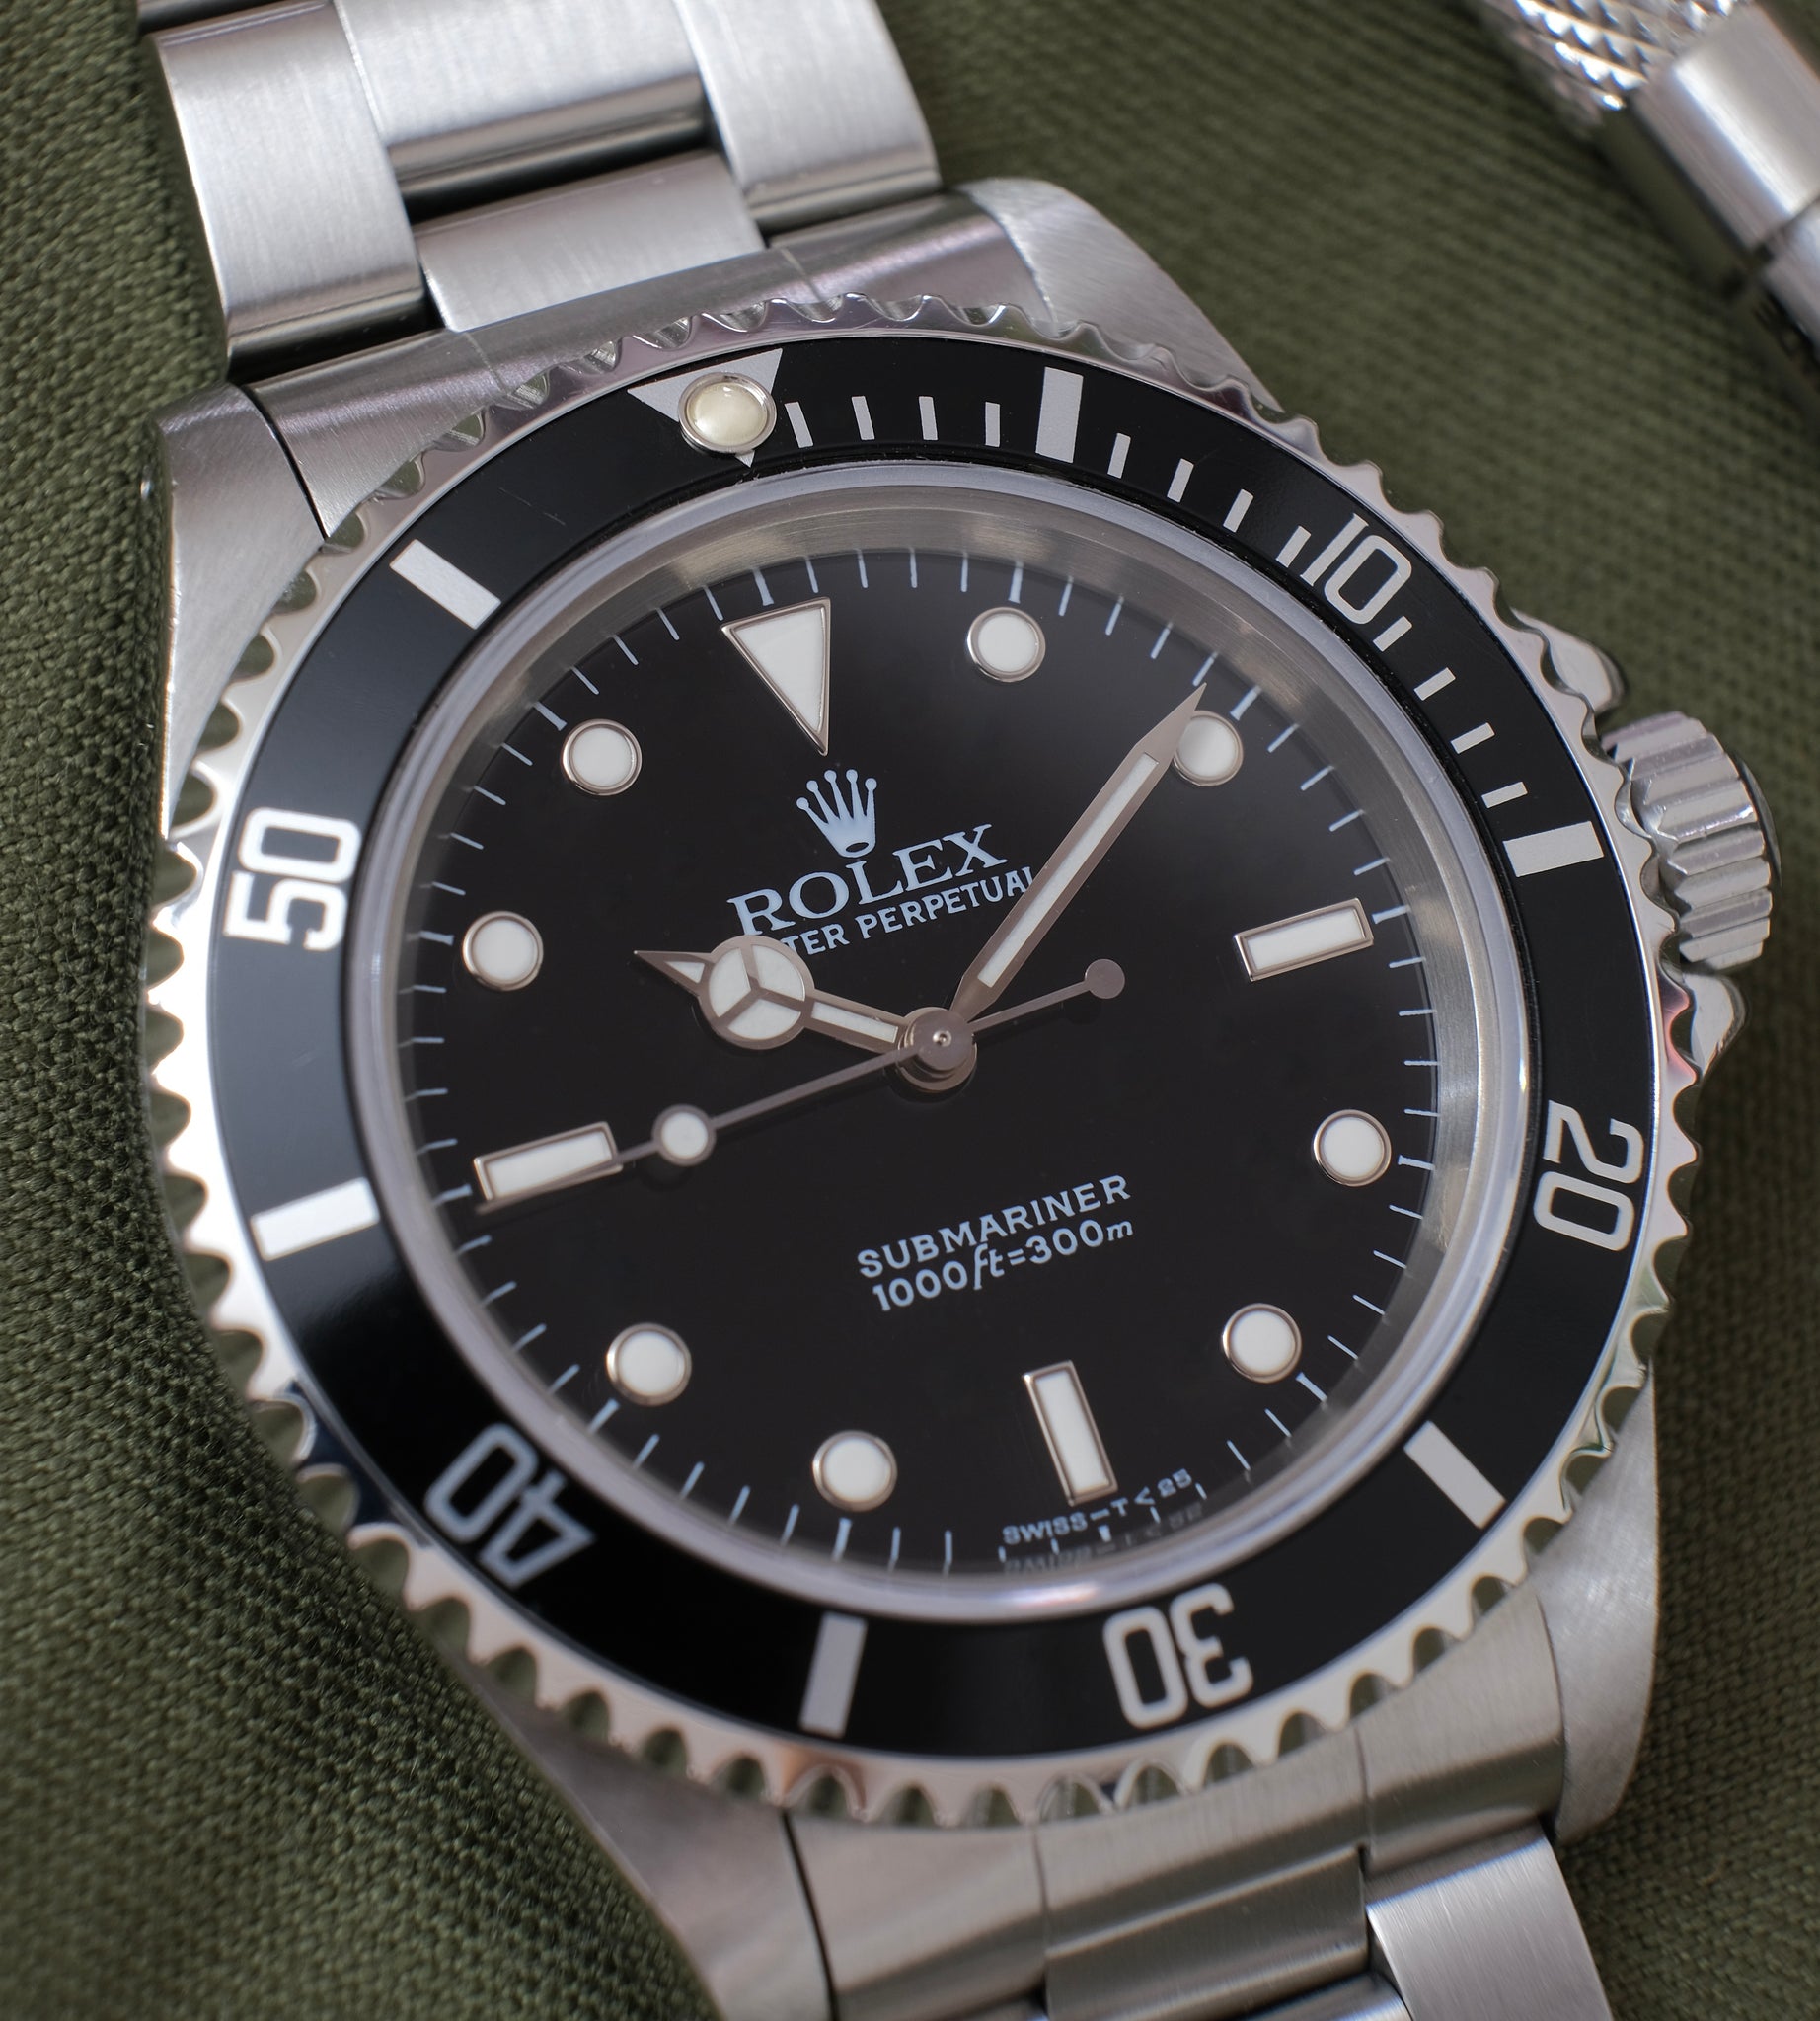 Submariner 14060 'No-Date' 1997 – 10 over